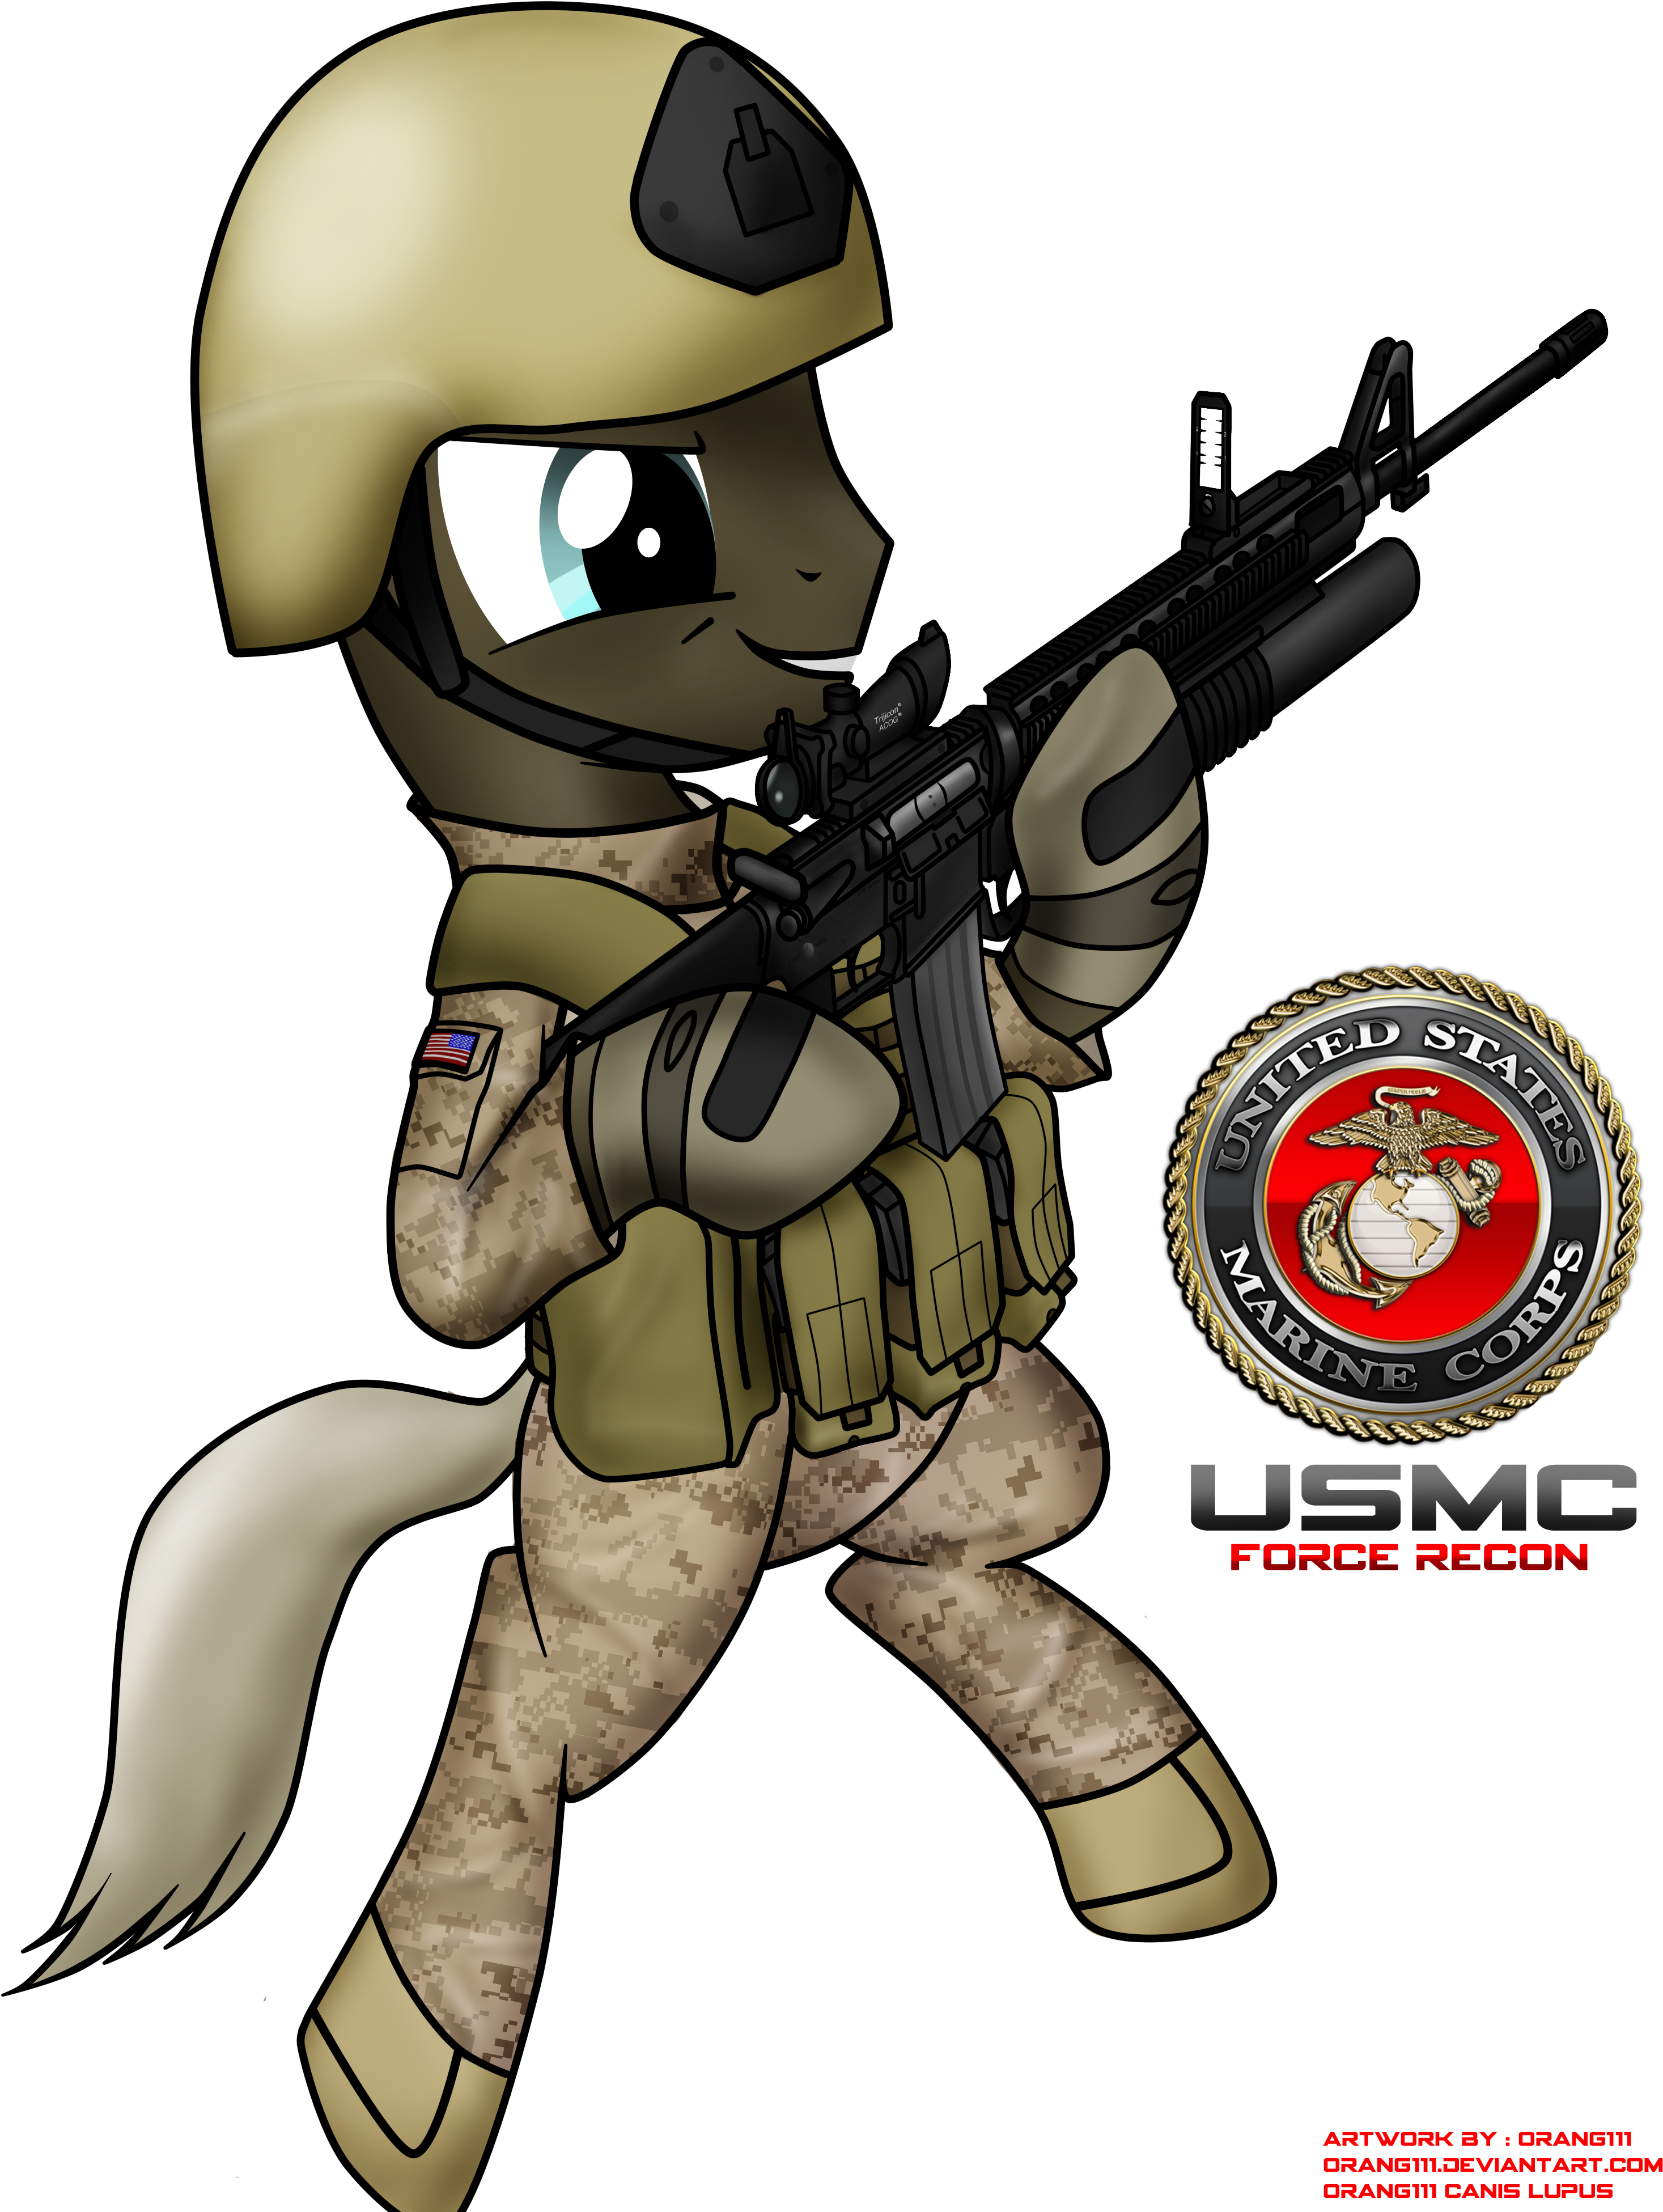 Usmc Force Recon Pony By Orang111 - Office Of Special Education Programs (3000x4000)